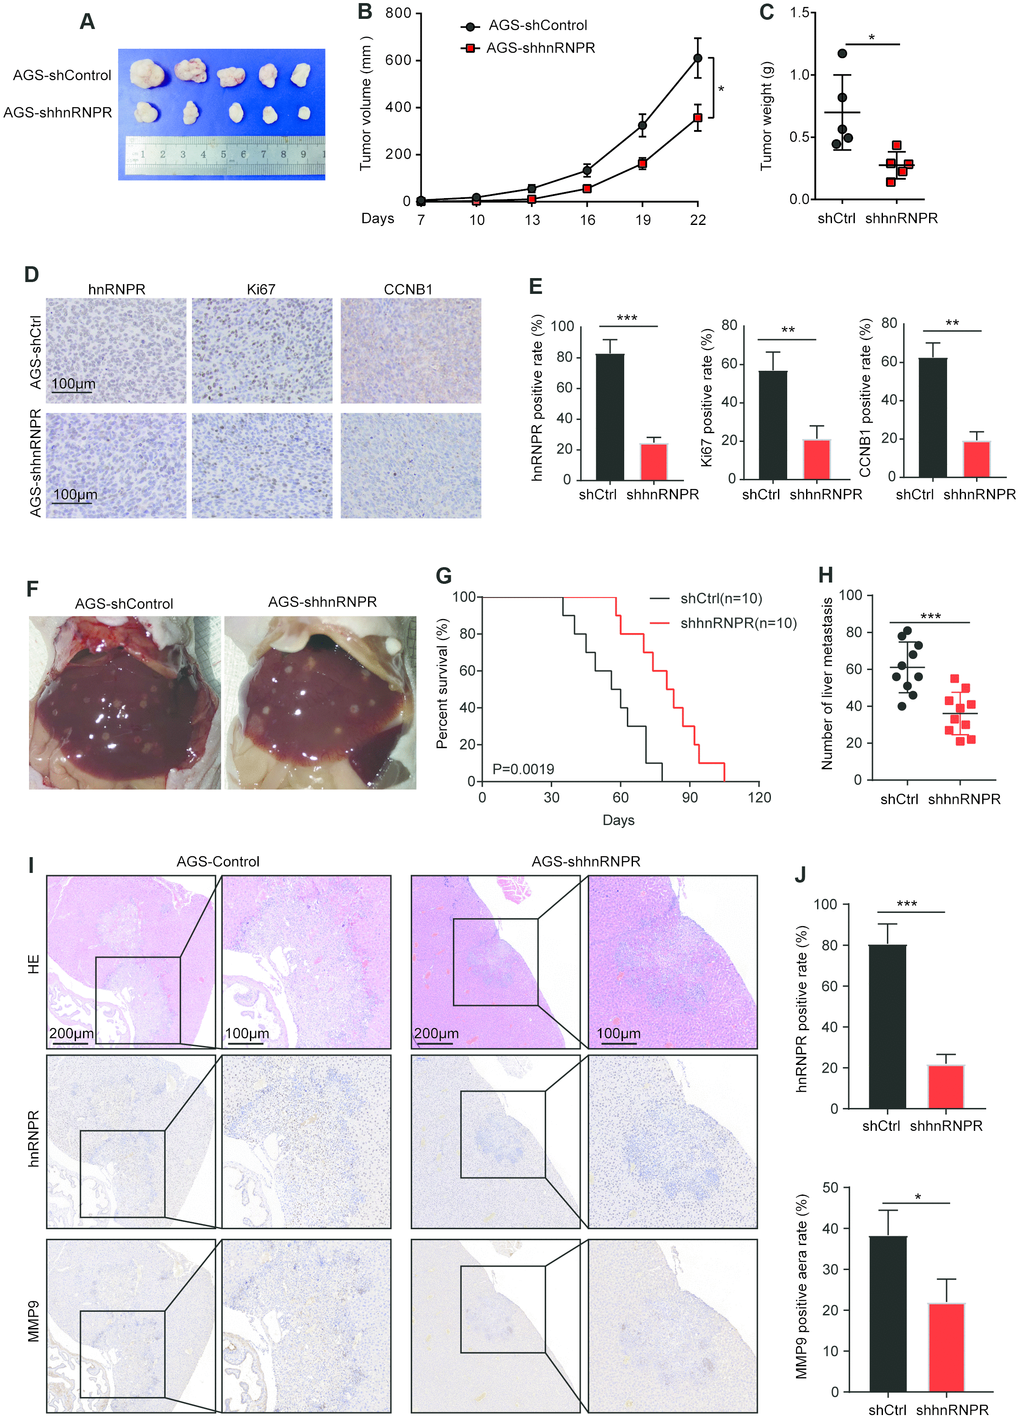 Repression of hnRNPR inhibits tumor growth and metastasis in vivo. (A) Tumor size and (B) tumor volumes in hnRNPR-knockdown and control groups. (C) Tumor weight in hnRNPR-knockdown and control groups (n=5). (D) Representative images (E) quantification of hnRNPR, Ki67, and CCNB1 in the indicated xenograft tumors. (F) Representative images of liver metastasis in the indicated tumors. (G) Kaplan–Meier curve of mice showing low expression of hnRNPR versus high expression of hnRNPR group. (H) Number of liver metastasis (I) representative image (J) Quantification of hnRNPR and MMP9 expression in the indicated xenograft tumors. P values were calculated with two-tailed unpaired Student’s t-test, or log rank Mantel-Cox test. *, P